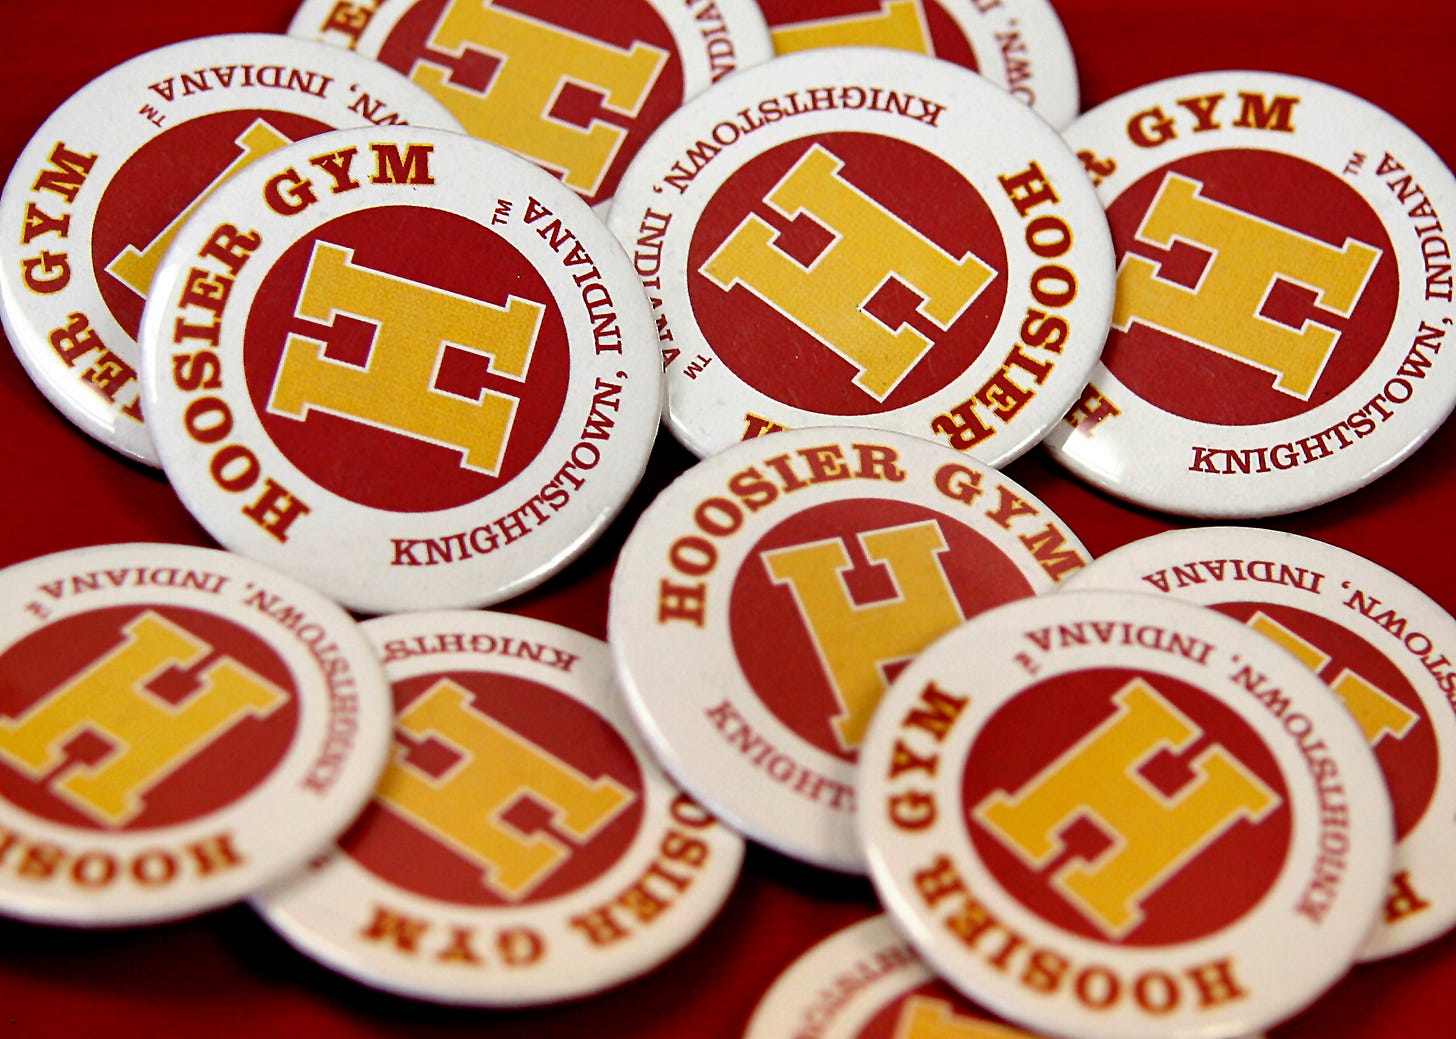 Hoosier Gym souvenirs are always on sale, and proceeds benefit the historic structure. T-shirts, DVD copies of the film, posters, pencils and other items can always be purchased on a visit to the gym. Among the favorites are buttons like these and Jimmy Chitwood T-shirts emblazoned with the words, “I’ll make it.”